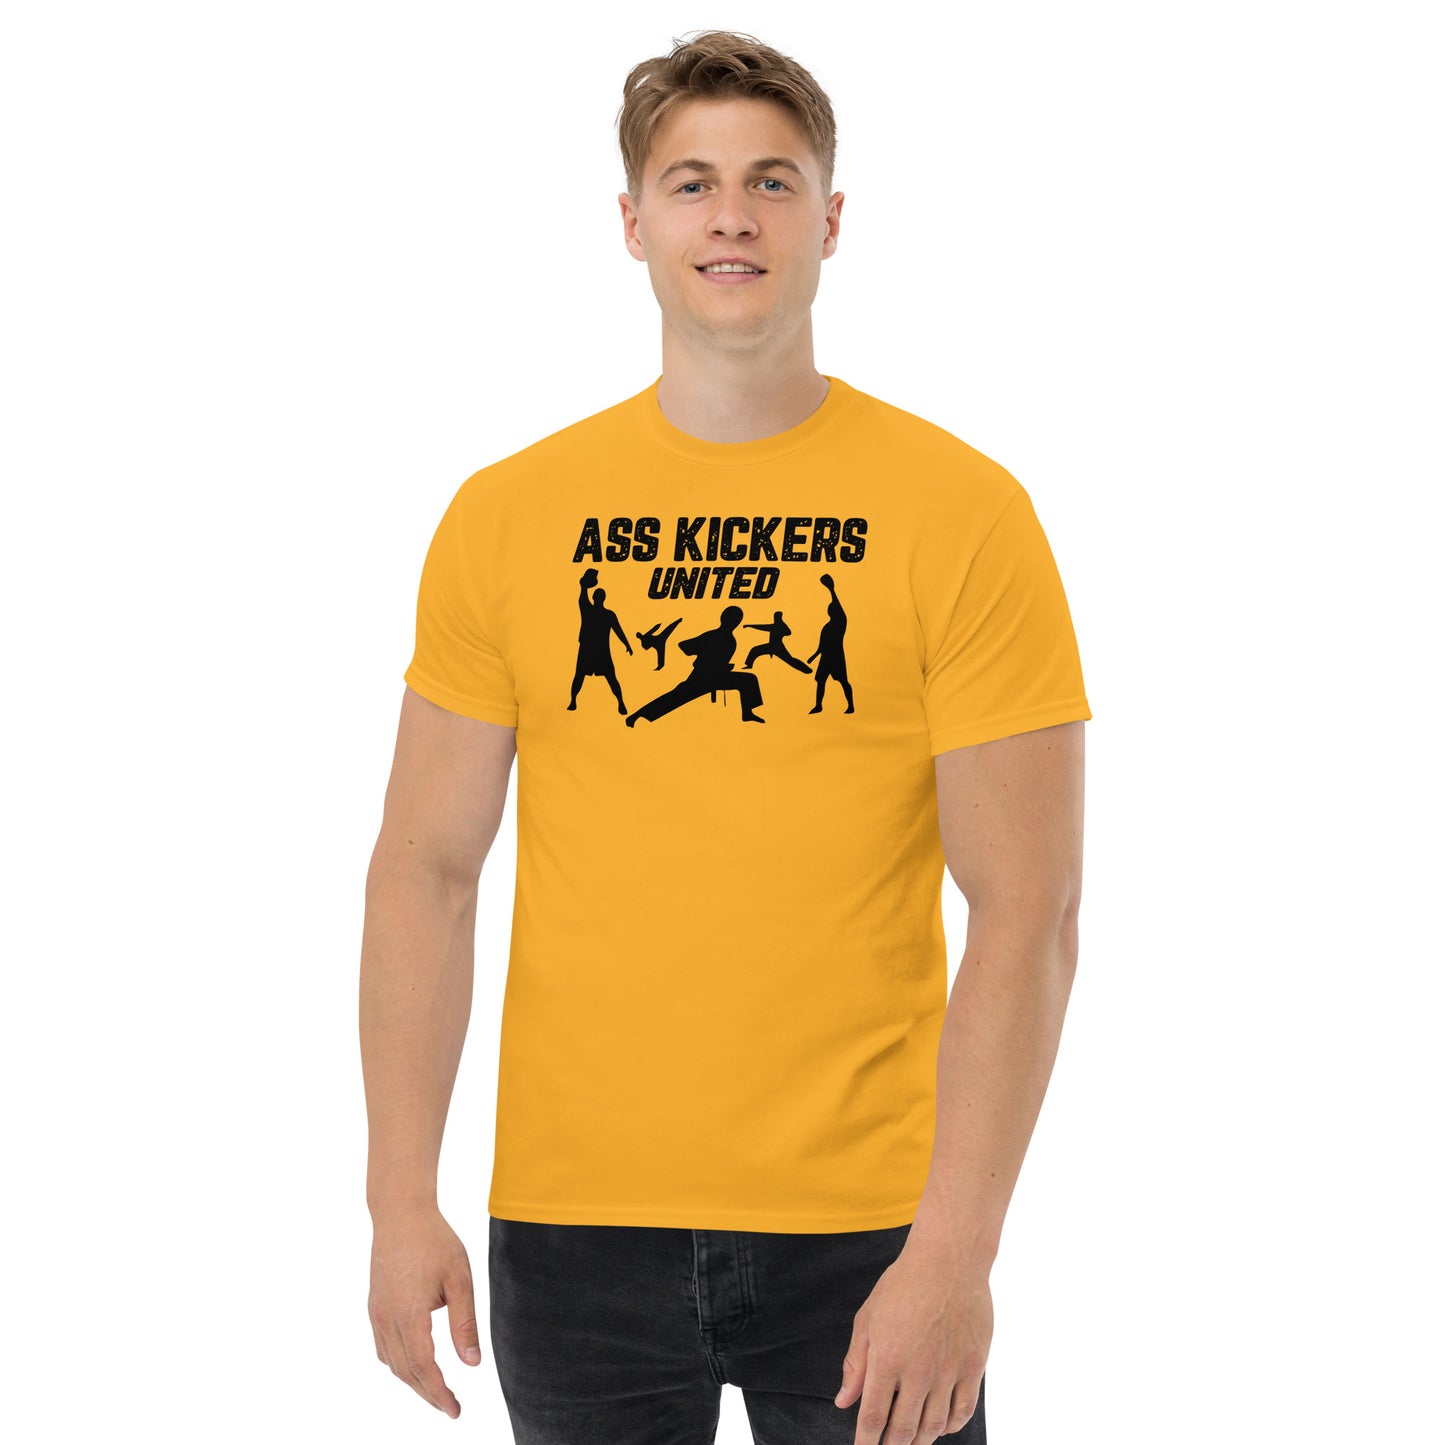 AssKickers United Men's classic tee